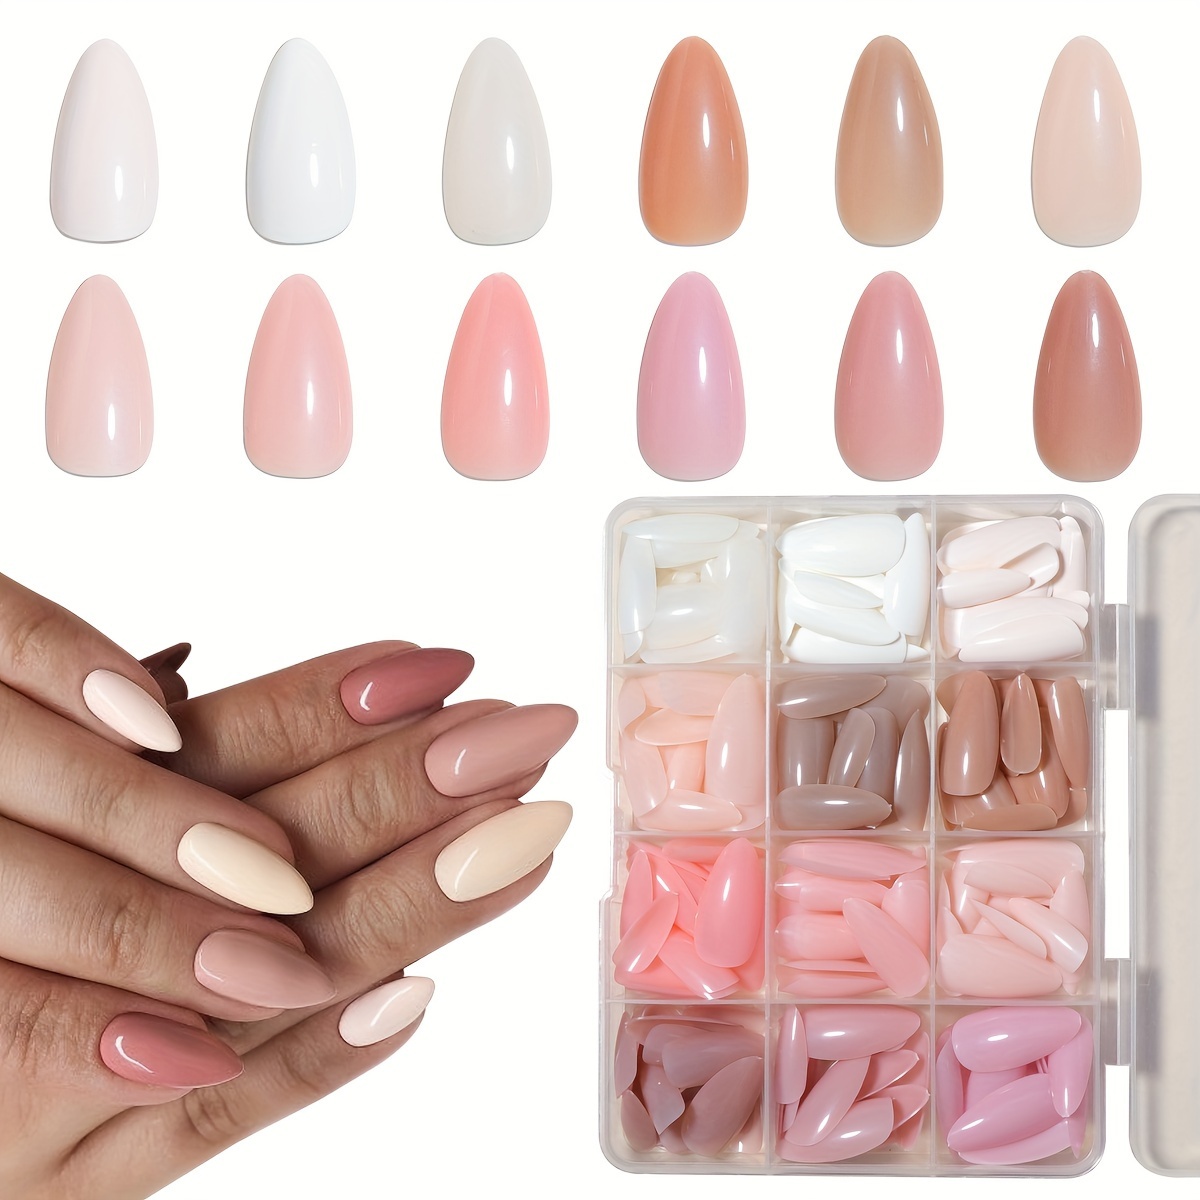 

12-grid Box Warm Pink Series Almond-shaped Wearable Nails